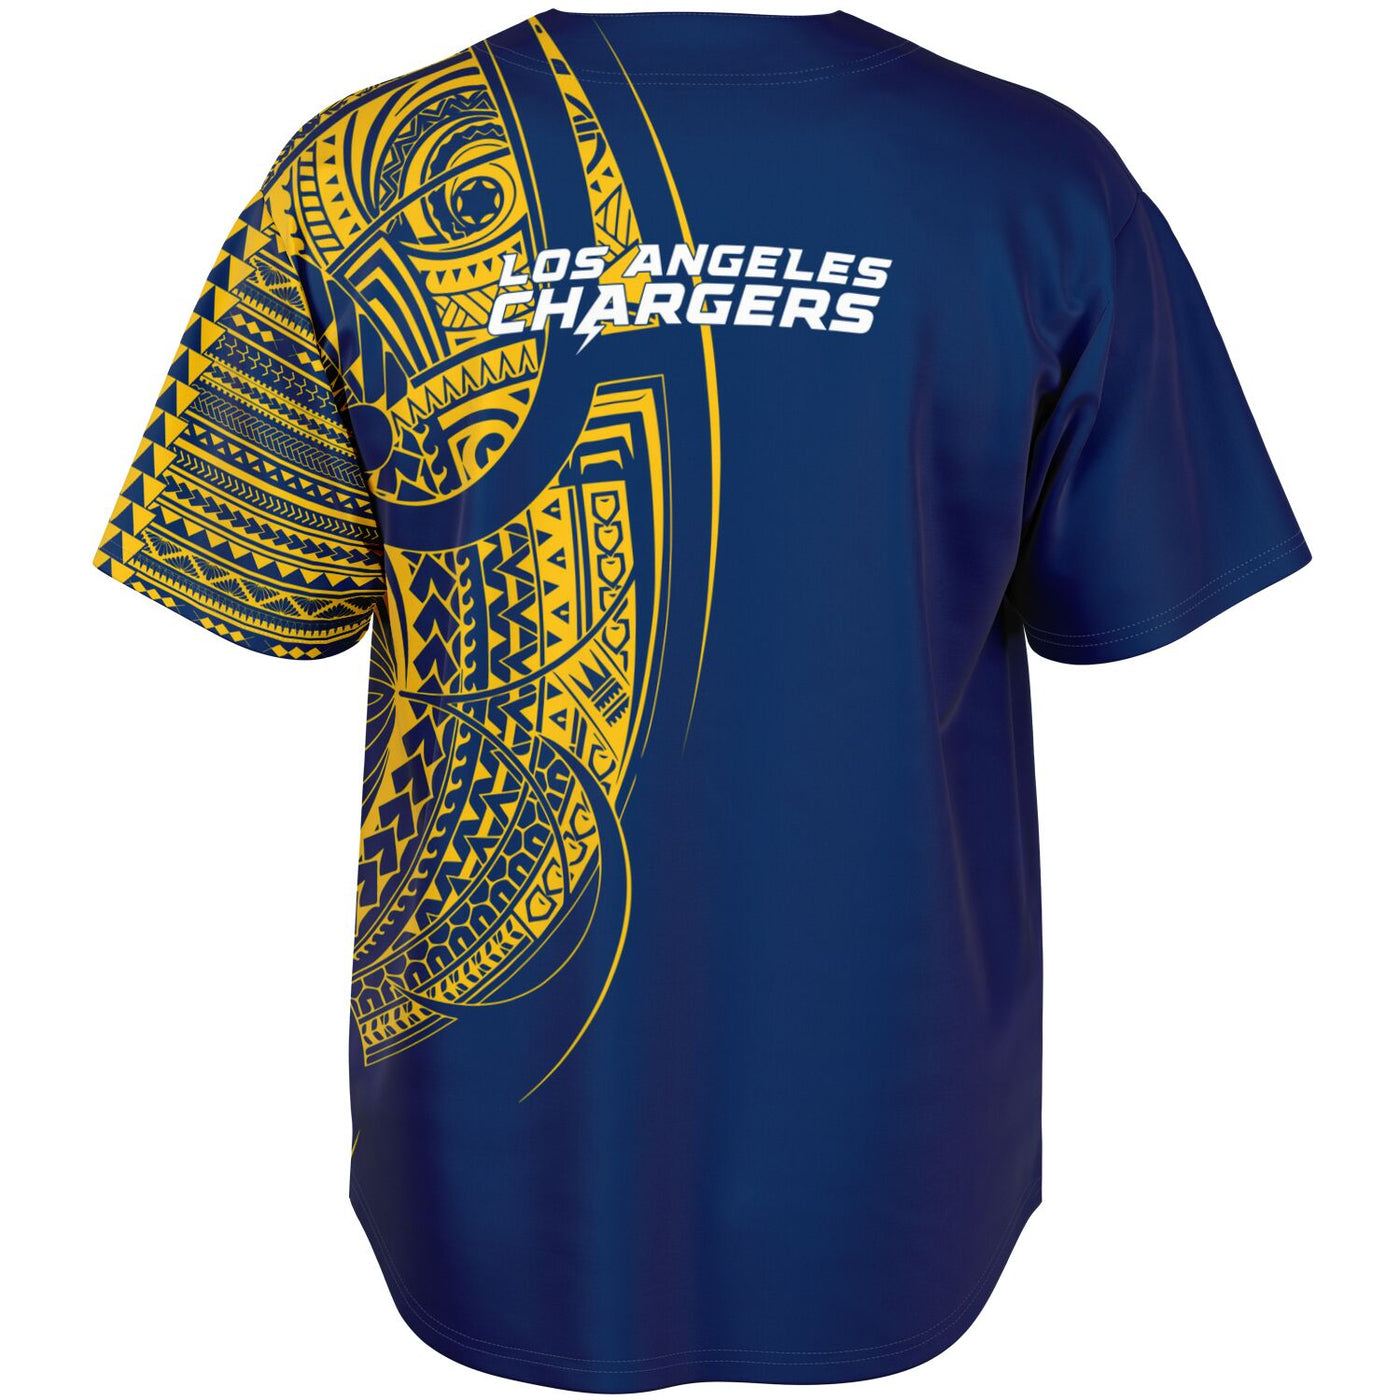 Los Angeles Chargers Apparel, Los Angeles Chargers Jerseys, Los Angeles  Chargers Gear